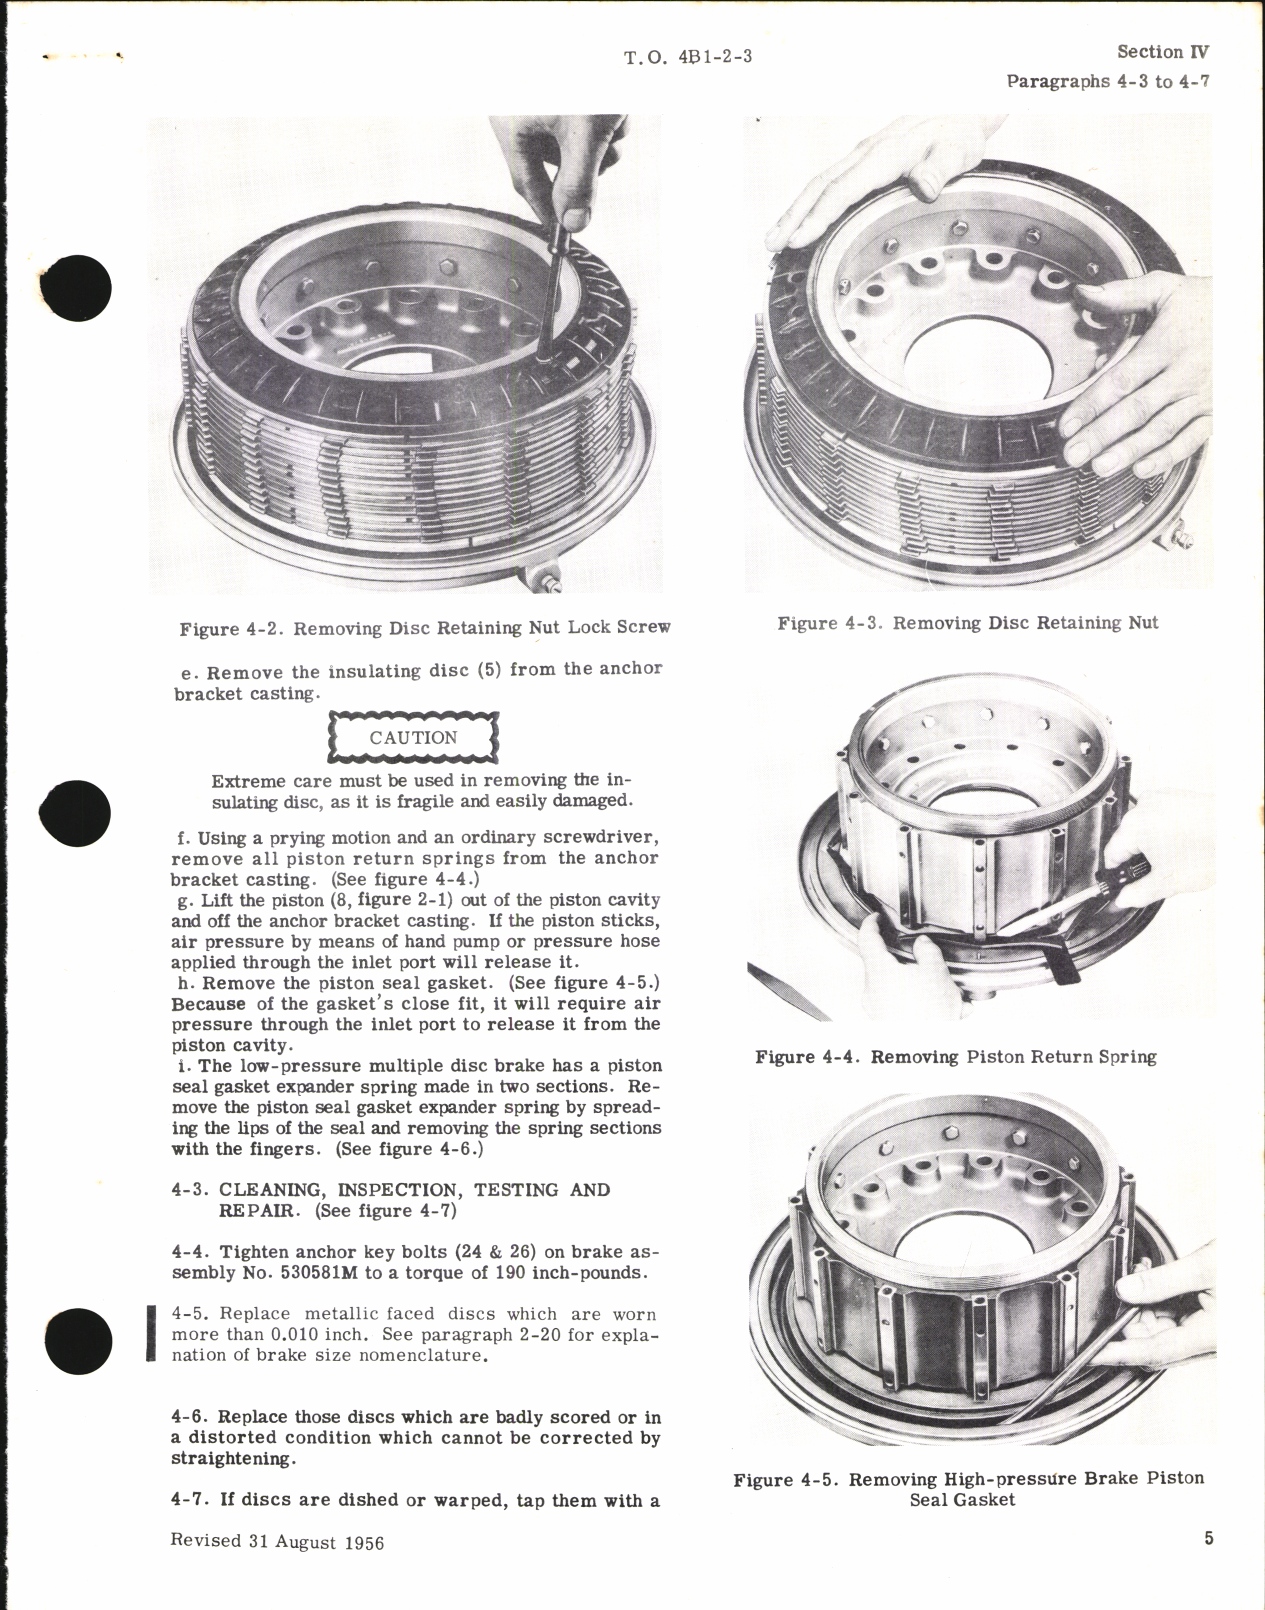 Sample page 3 from AirCorps Library document: Overhaul Instructions for Multiple Disc Brakes (Goodyear)